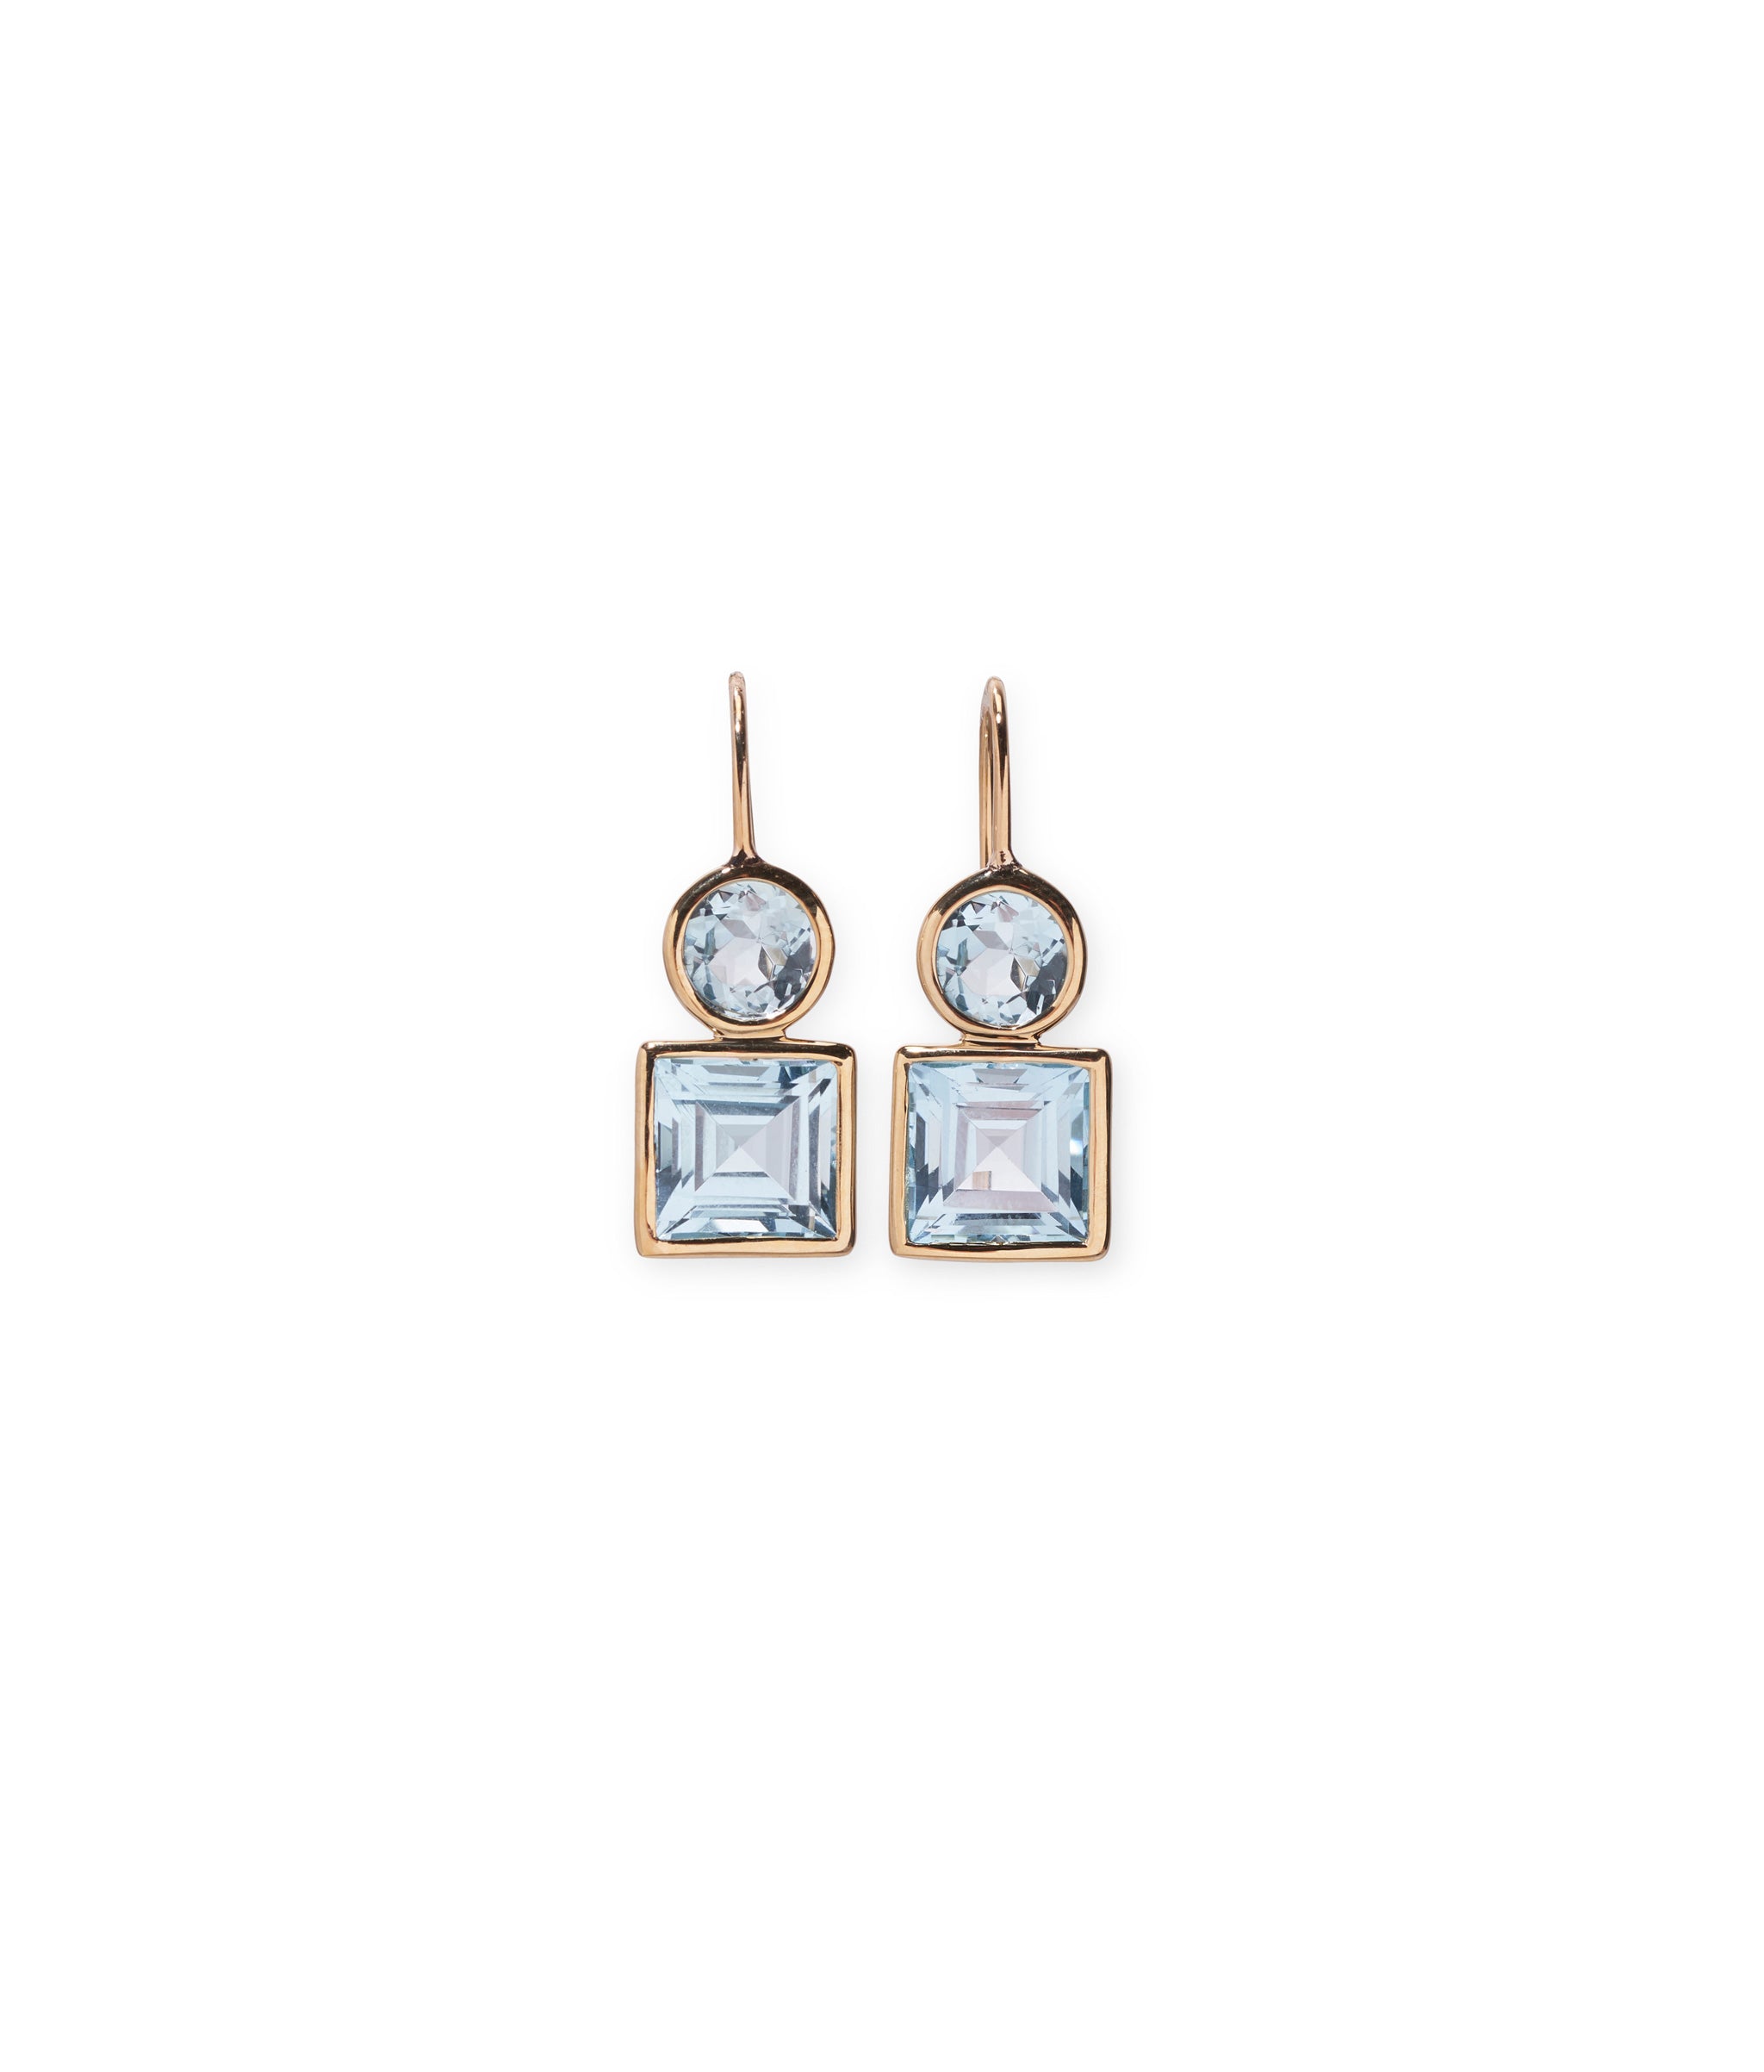 14k Pastille Earrings in Sky Blue Topaz. Fine gold earwires with faceted light blue topaz round and square stones.